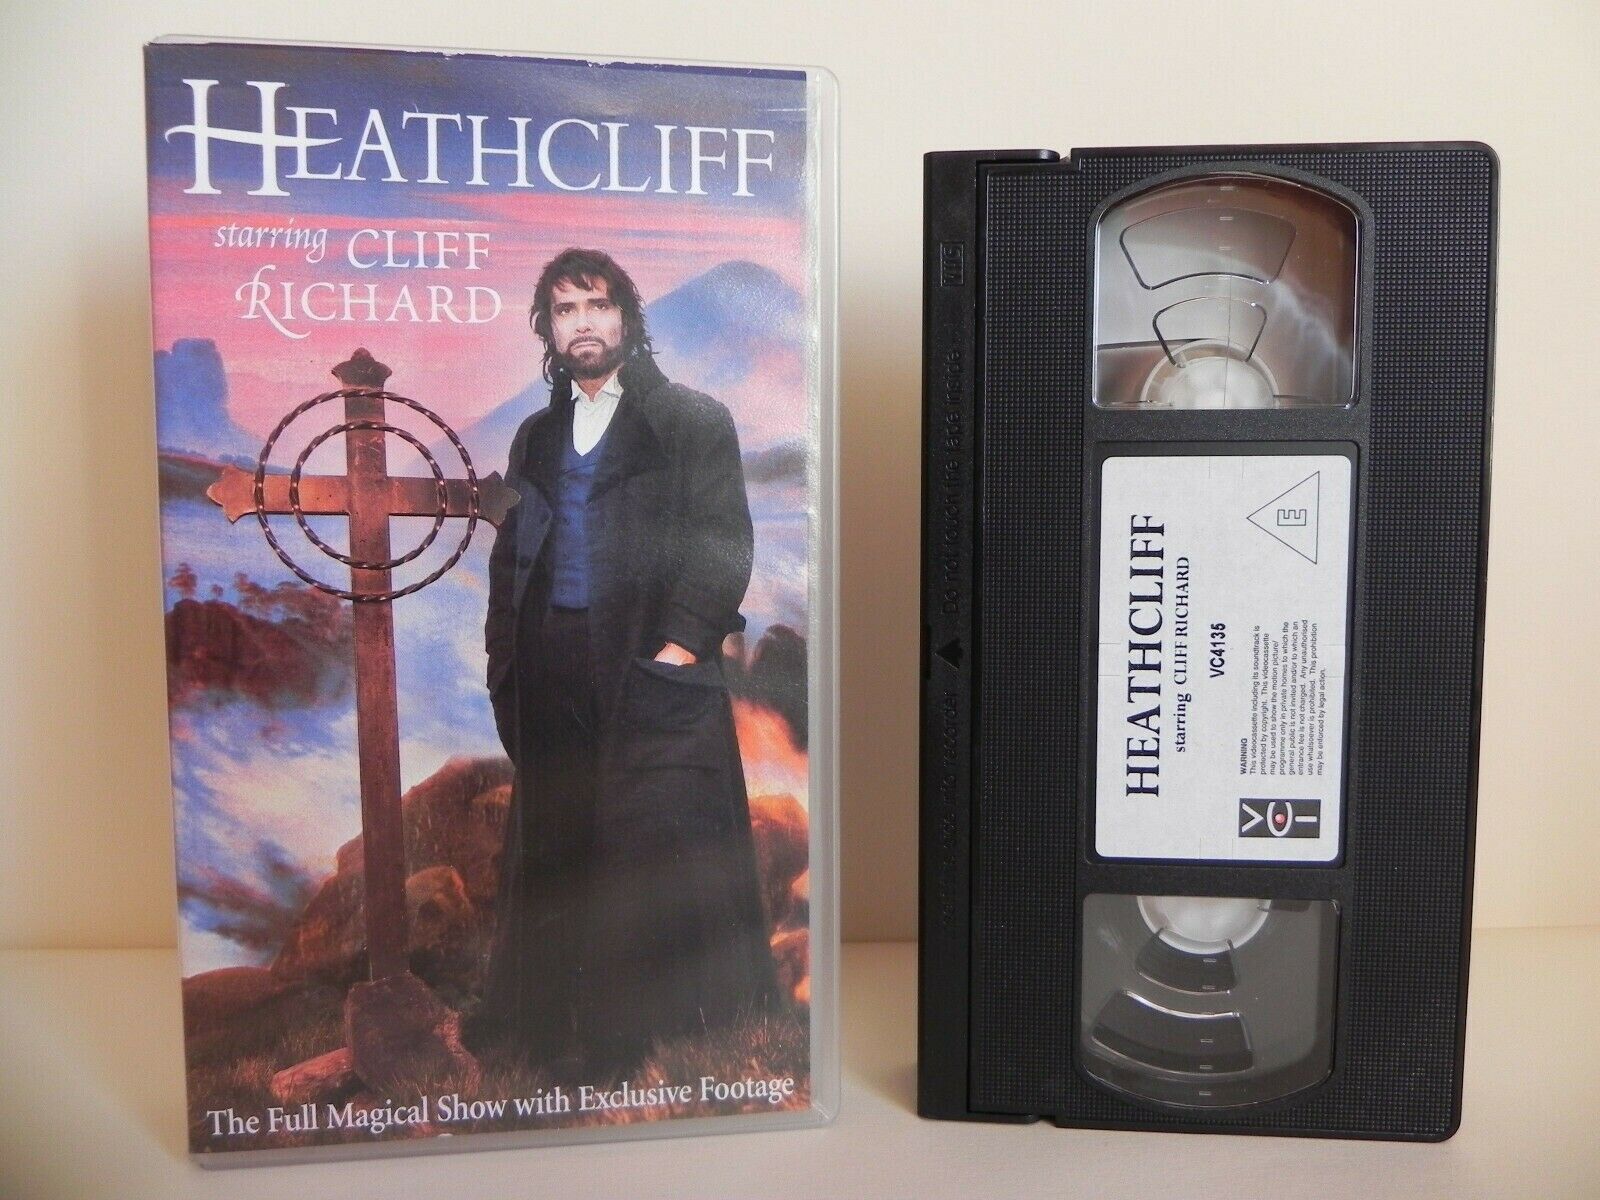 Heathcliff - VCI - Magical Show - Cliff Richard - Stunning - Remarkable - VHS-